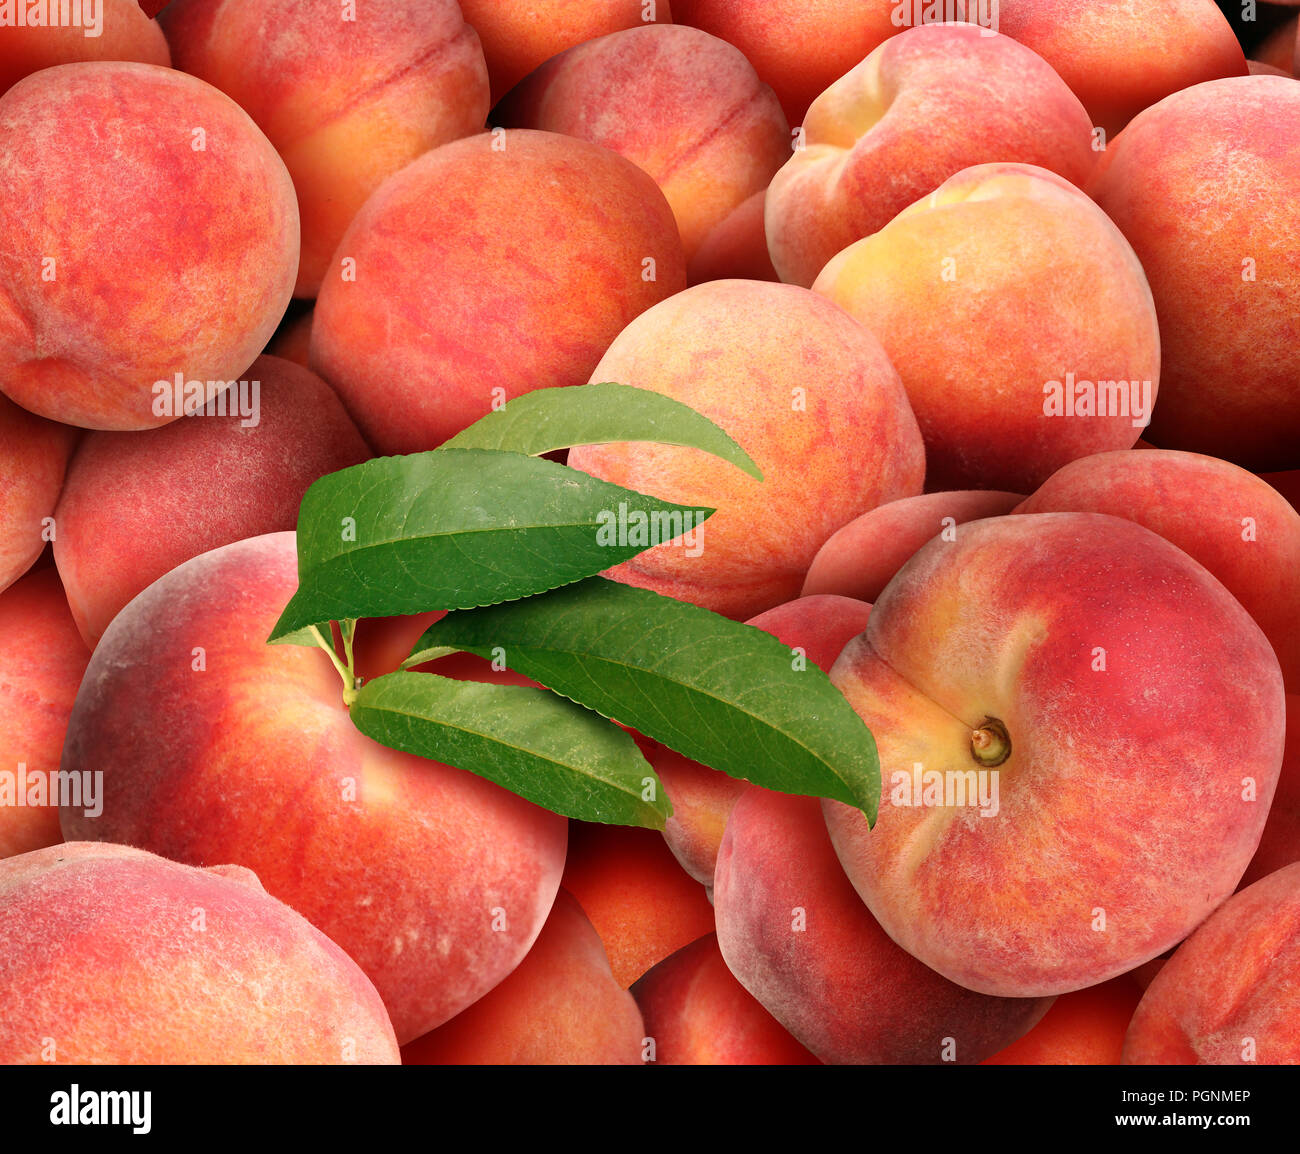 Peach background with a pile of fresh juicy ripe peaches as a summer fruit harvest. Stock Photo